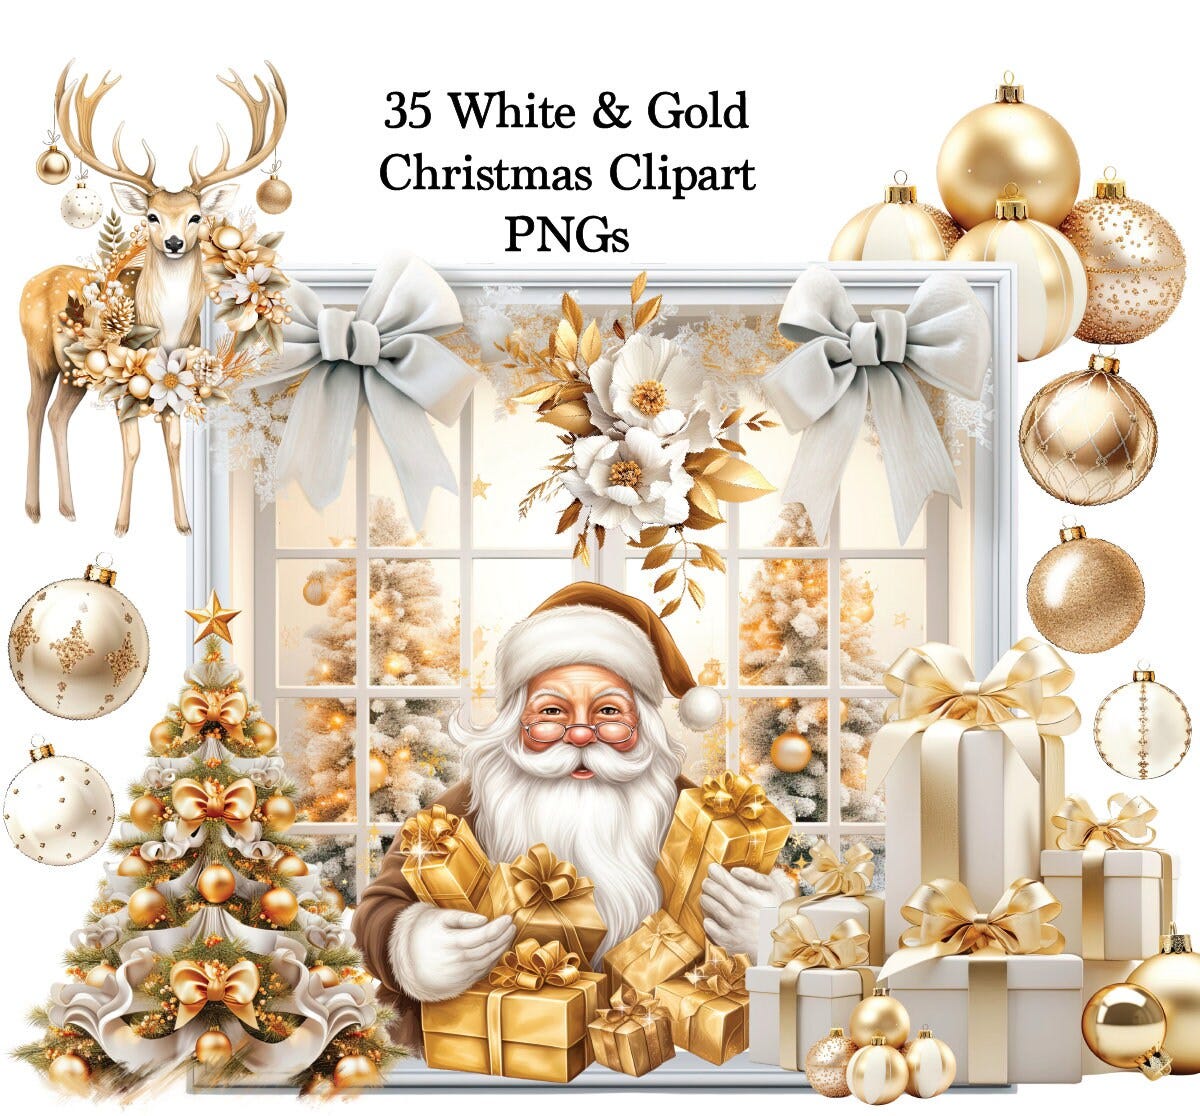 White and Gold Christmas Clipart, Gold Christmas Ornaments, Holiday Home Decor, Classy Christmas Decor, Christmas Decor, Holiday Home Decor